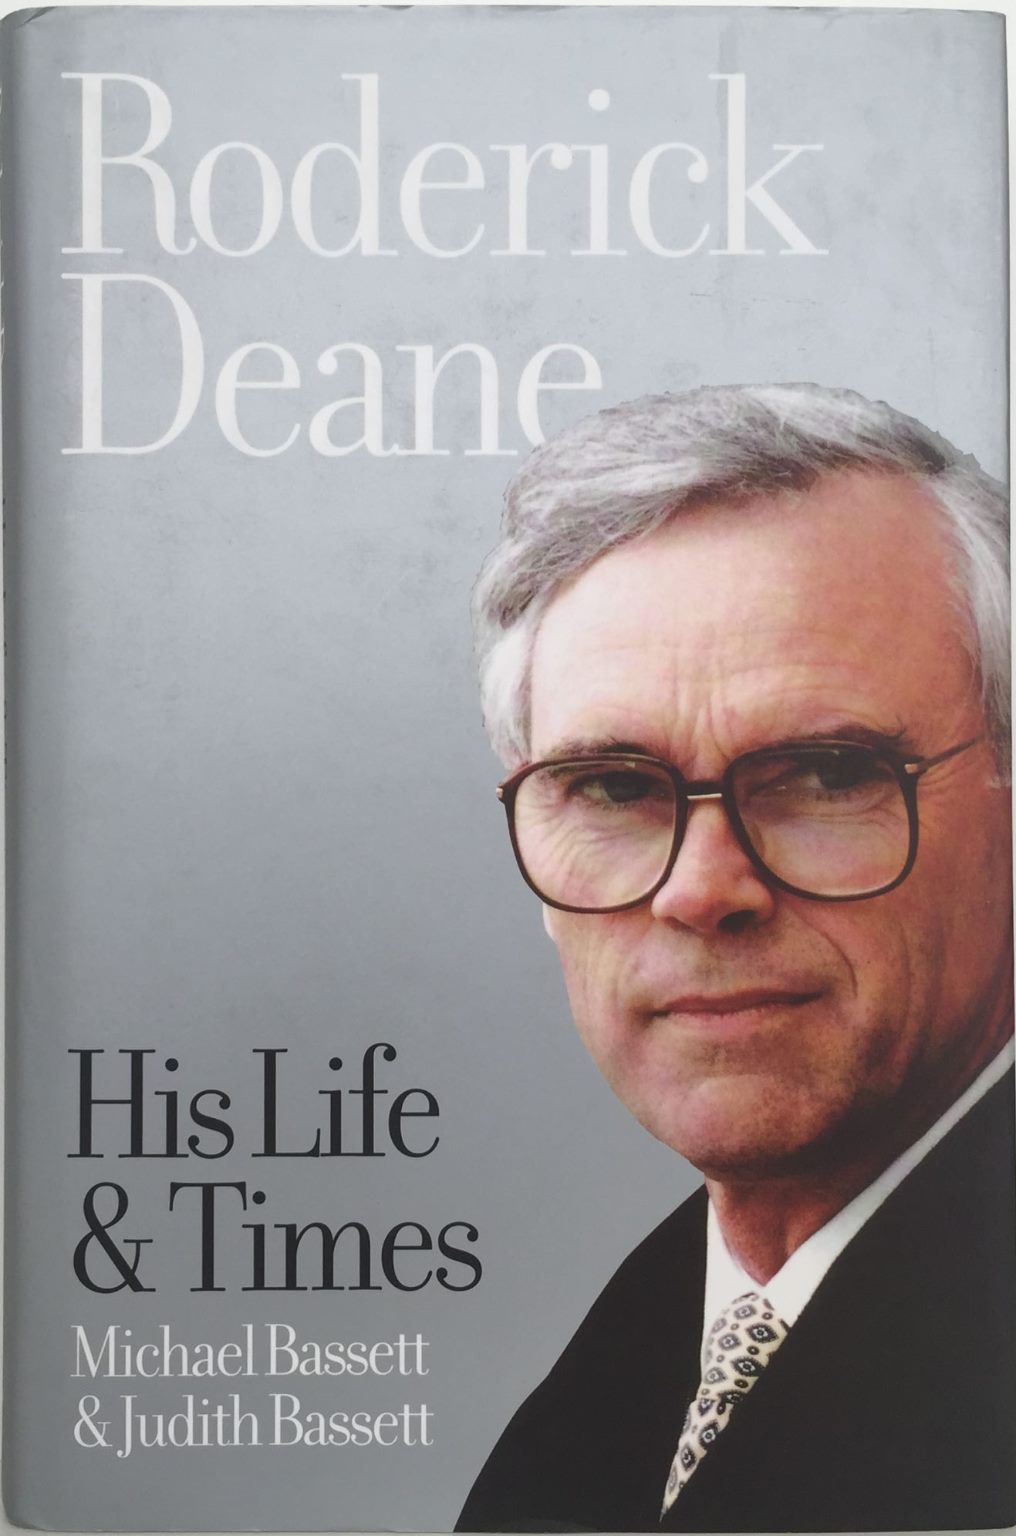 RODERICK DEANE: His Life and Times